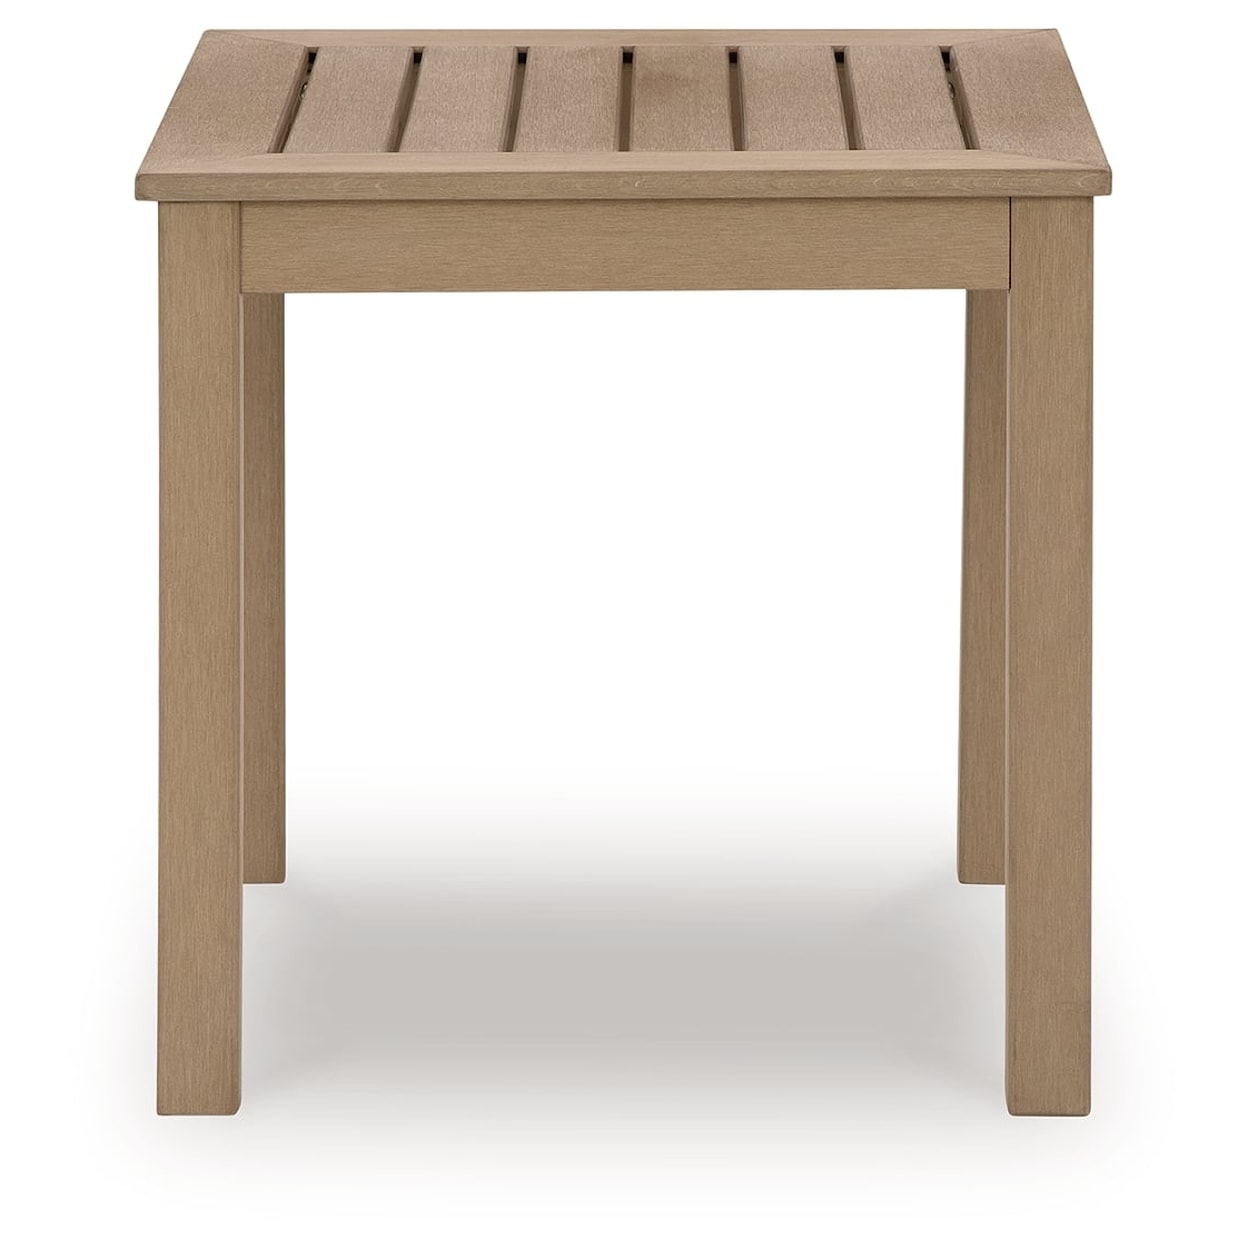 Signature Hallow Creek Outdoor End Table